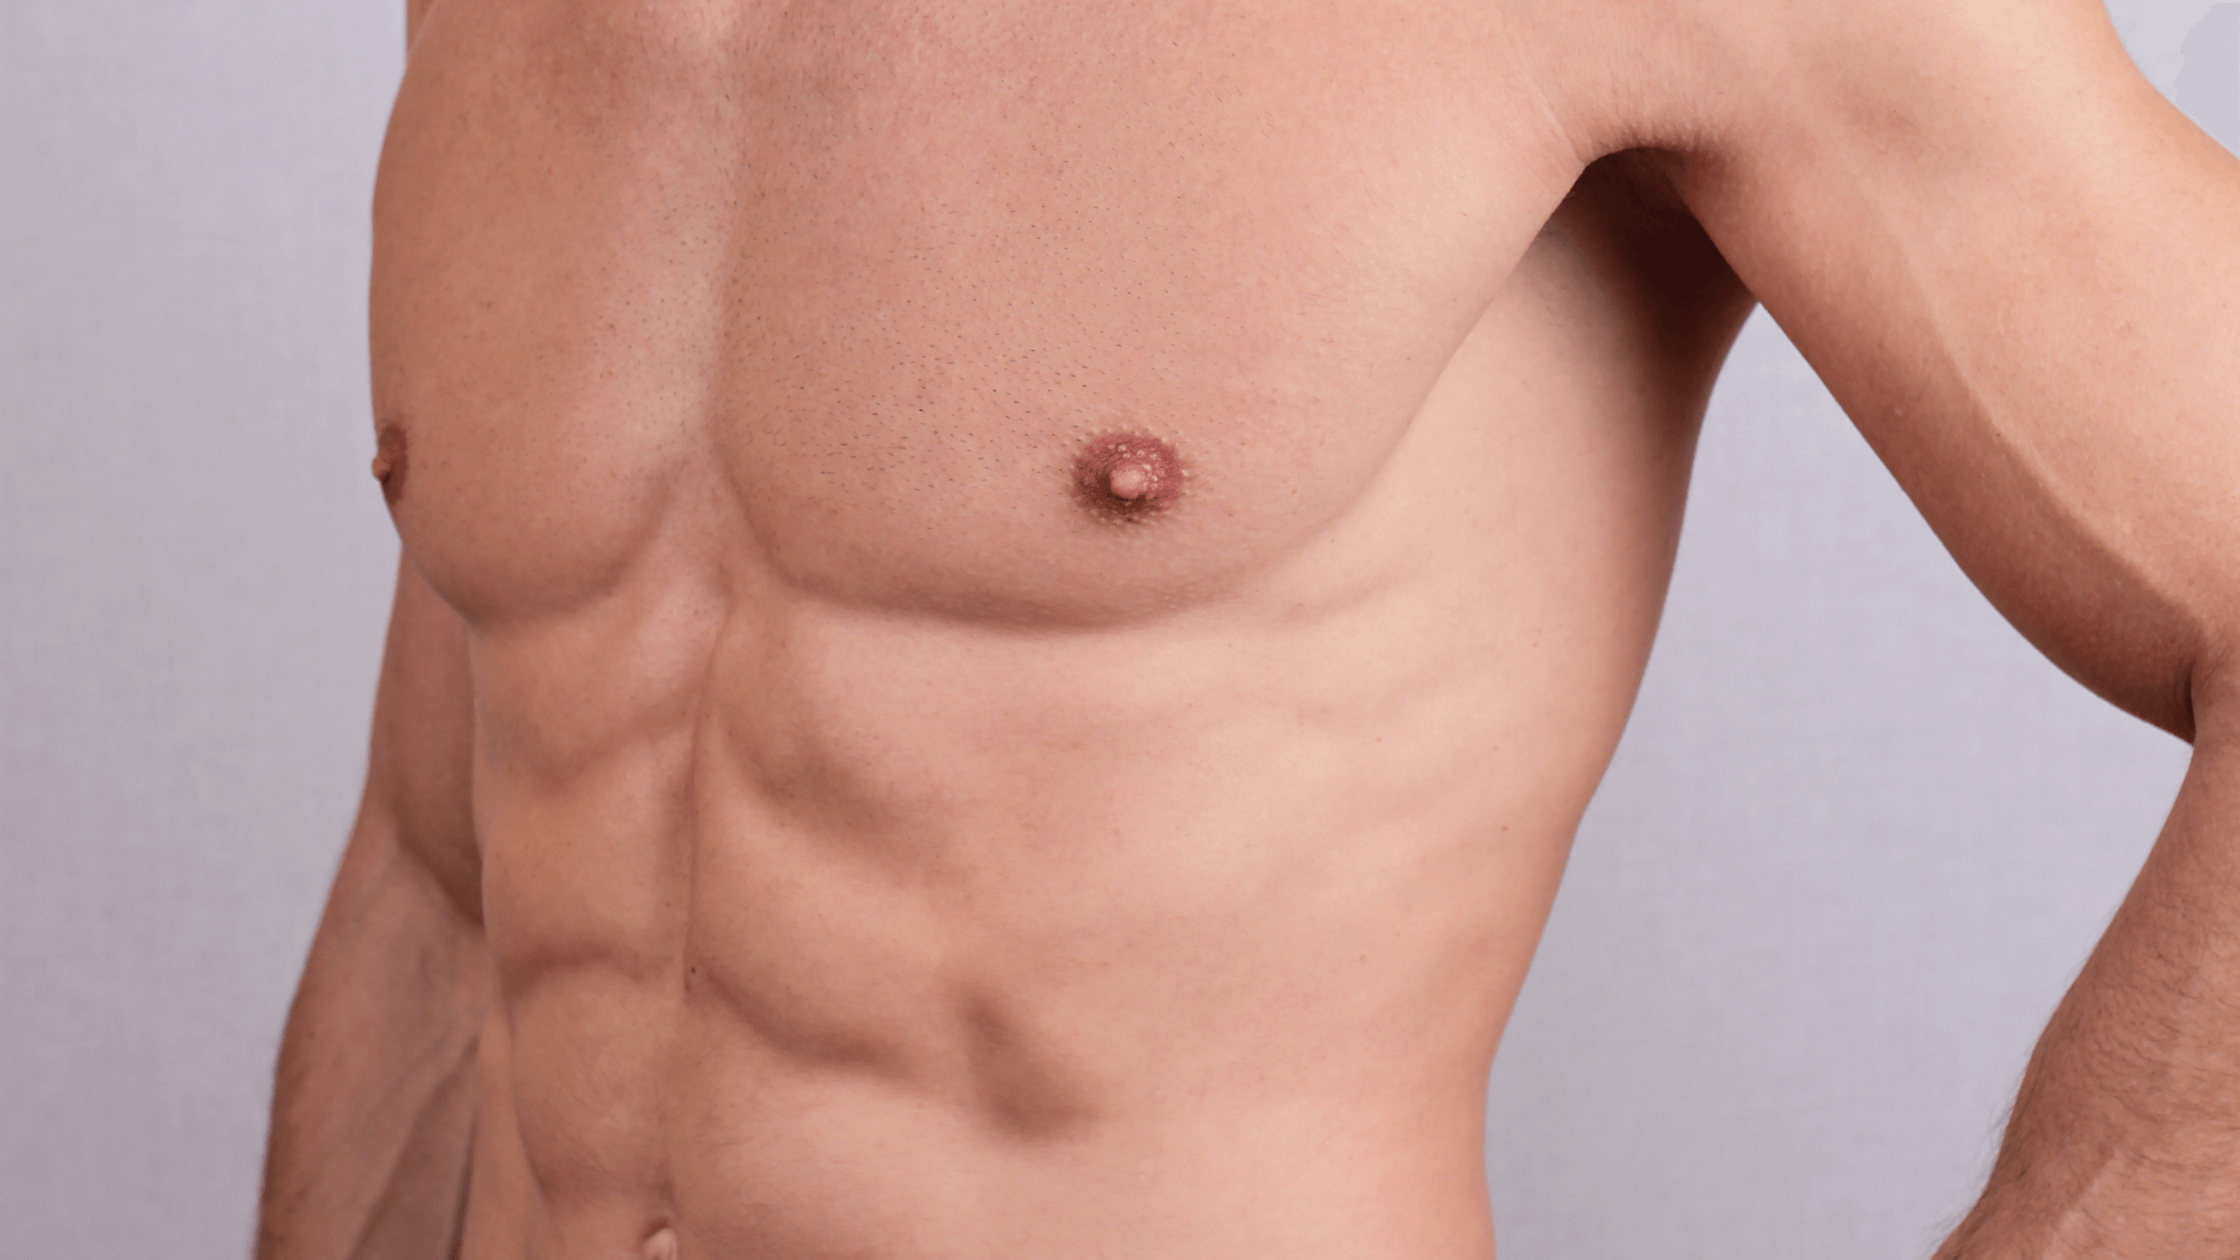 How Can Chest Contouring Enhance Your Physique?